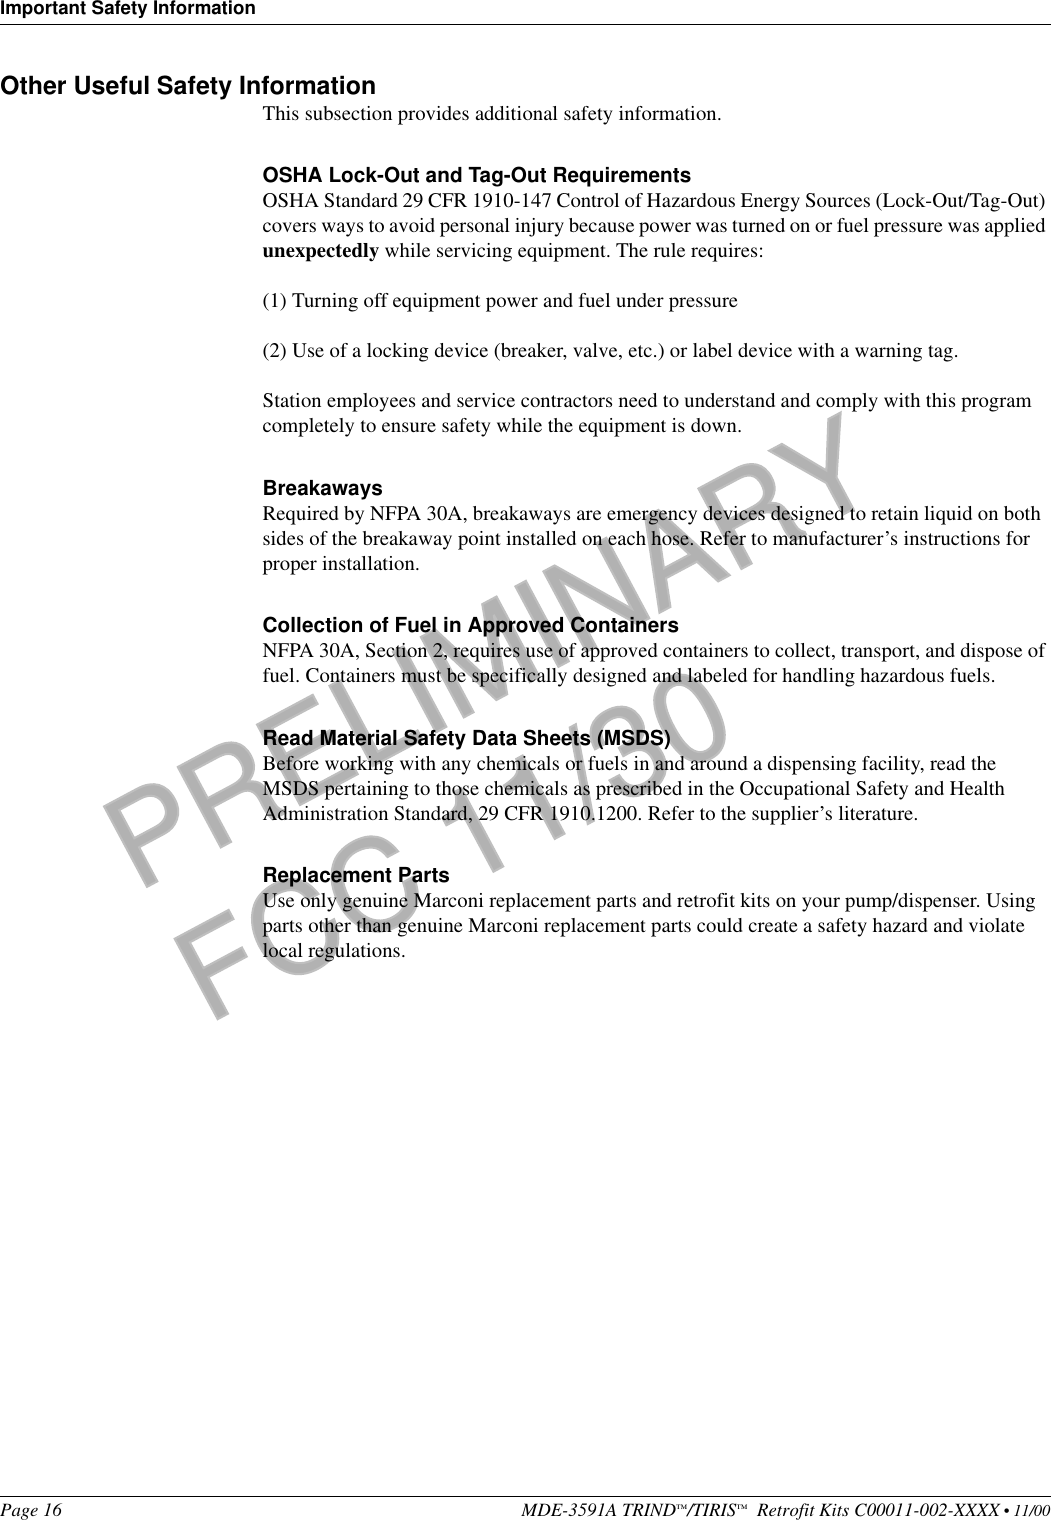 Important Safety InformationPage 16 MDE-3591A TRIND™/TIRIS™  Retrofit Kits C00011-002-XXXX • 11/00PRELIMINARYFCC 11/30Other Useful Safety InformationThis subsection provides additional safety information.OSHA Lock-Out and Tag-Out RequirementsOSHA Standard 29 CFR 1910-147 Control of Hazardous Energy Sources (Lock-Out/Tag-Out) covers ways to avoid personal injury because power was turned on or fuel pressure was applied unexpectedly while servicing equipment. The rule requires: (1) Turning off equipment power and fuel under pressure(2) Use of a locking device (breaker, valve, etc.) or label device with a warning tag.Station employees and service contractors need to understand and comply with this program completely to ensure safety while the equipment is down.BreakawaysRequired by NFPA 30A, breakaways are emergency devices designed to retain liquid on both sides of the breakaway point installed on each hose. Refer to manufacturer’s instructions for proper installation.Collection of Fuel in Approved ContainersNFPA 30A, Section 2, requires use of approved containers to collect, transport, and dispose of fuel. Containers must be specifically designed and labeled for handling hazardous fuels.Read Material Safety Data Sheets (MSDS)Before working with any chemicals or fuels in and around a dispensing facility, read the MSDS pertaining to those chemicals as prescribed in the Occupational Safety and Health Administration Standard, 29 CFR 1910.1200. Refer to the supplier’s literature.Replacement PartsUse only genuine Marconi replacement parts and retrofit kits on your pump/dispenser. Using parts other than genuine Marconi replacement parts could create a safety hazard and violate local regulations.